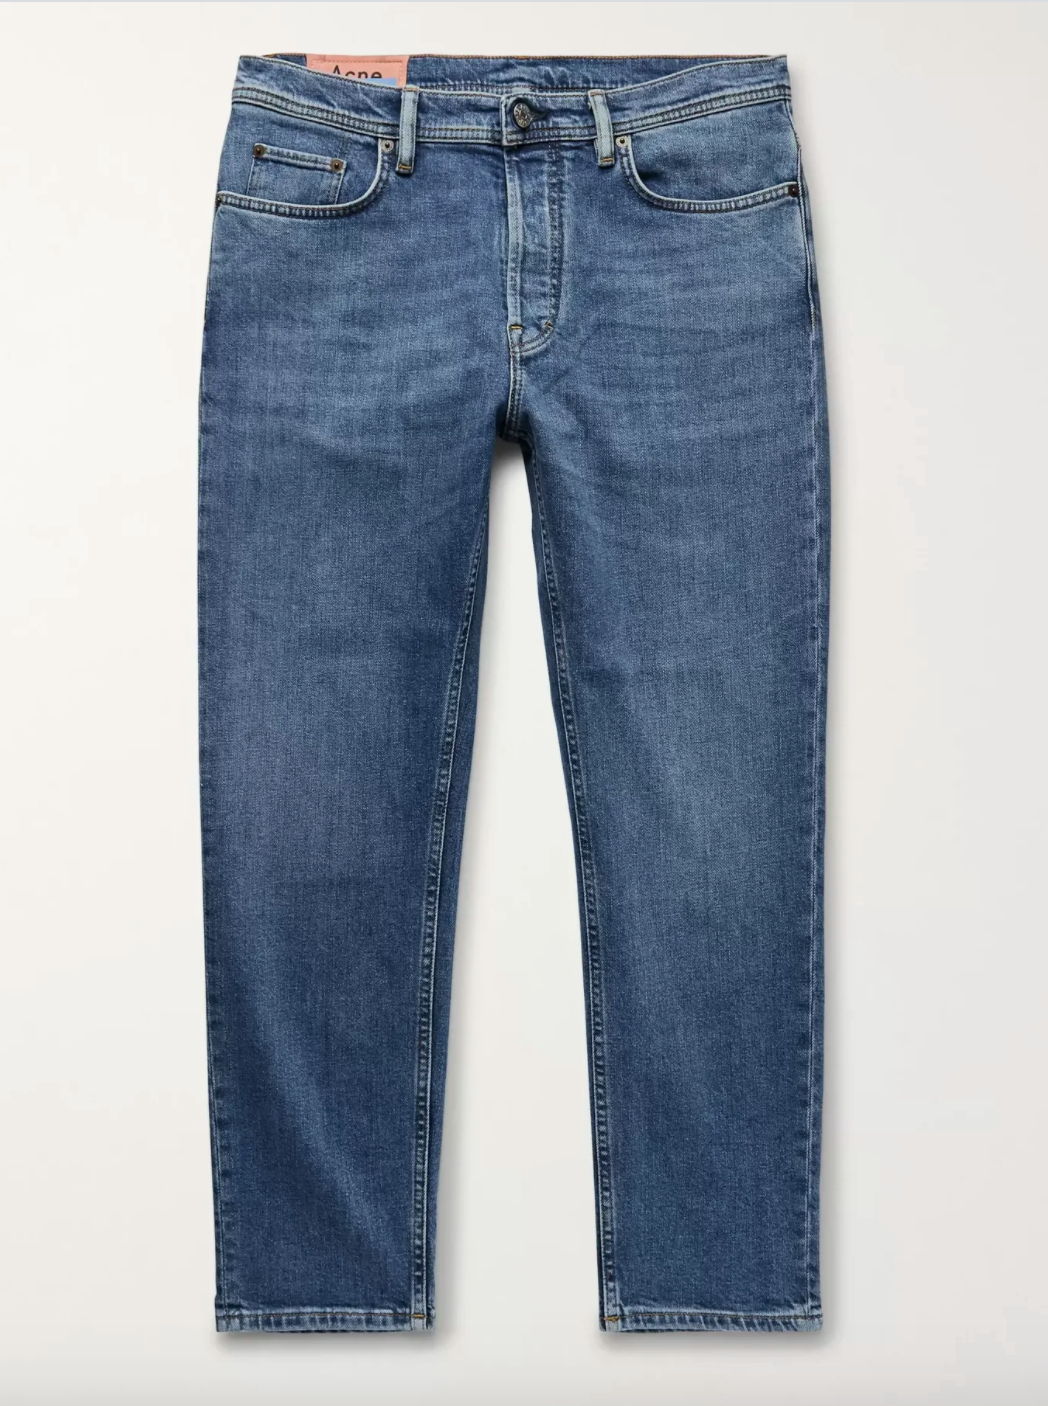 Jeans - Tabs Example